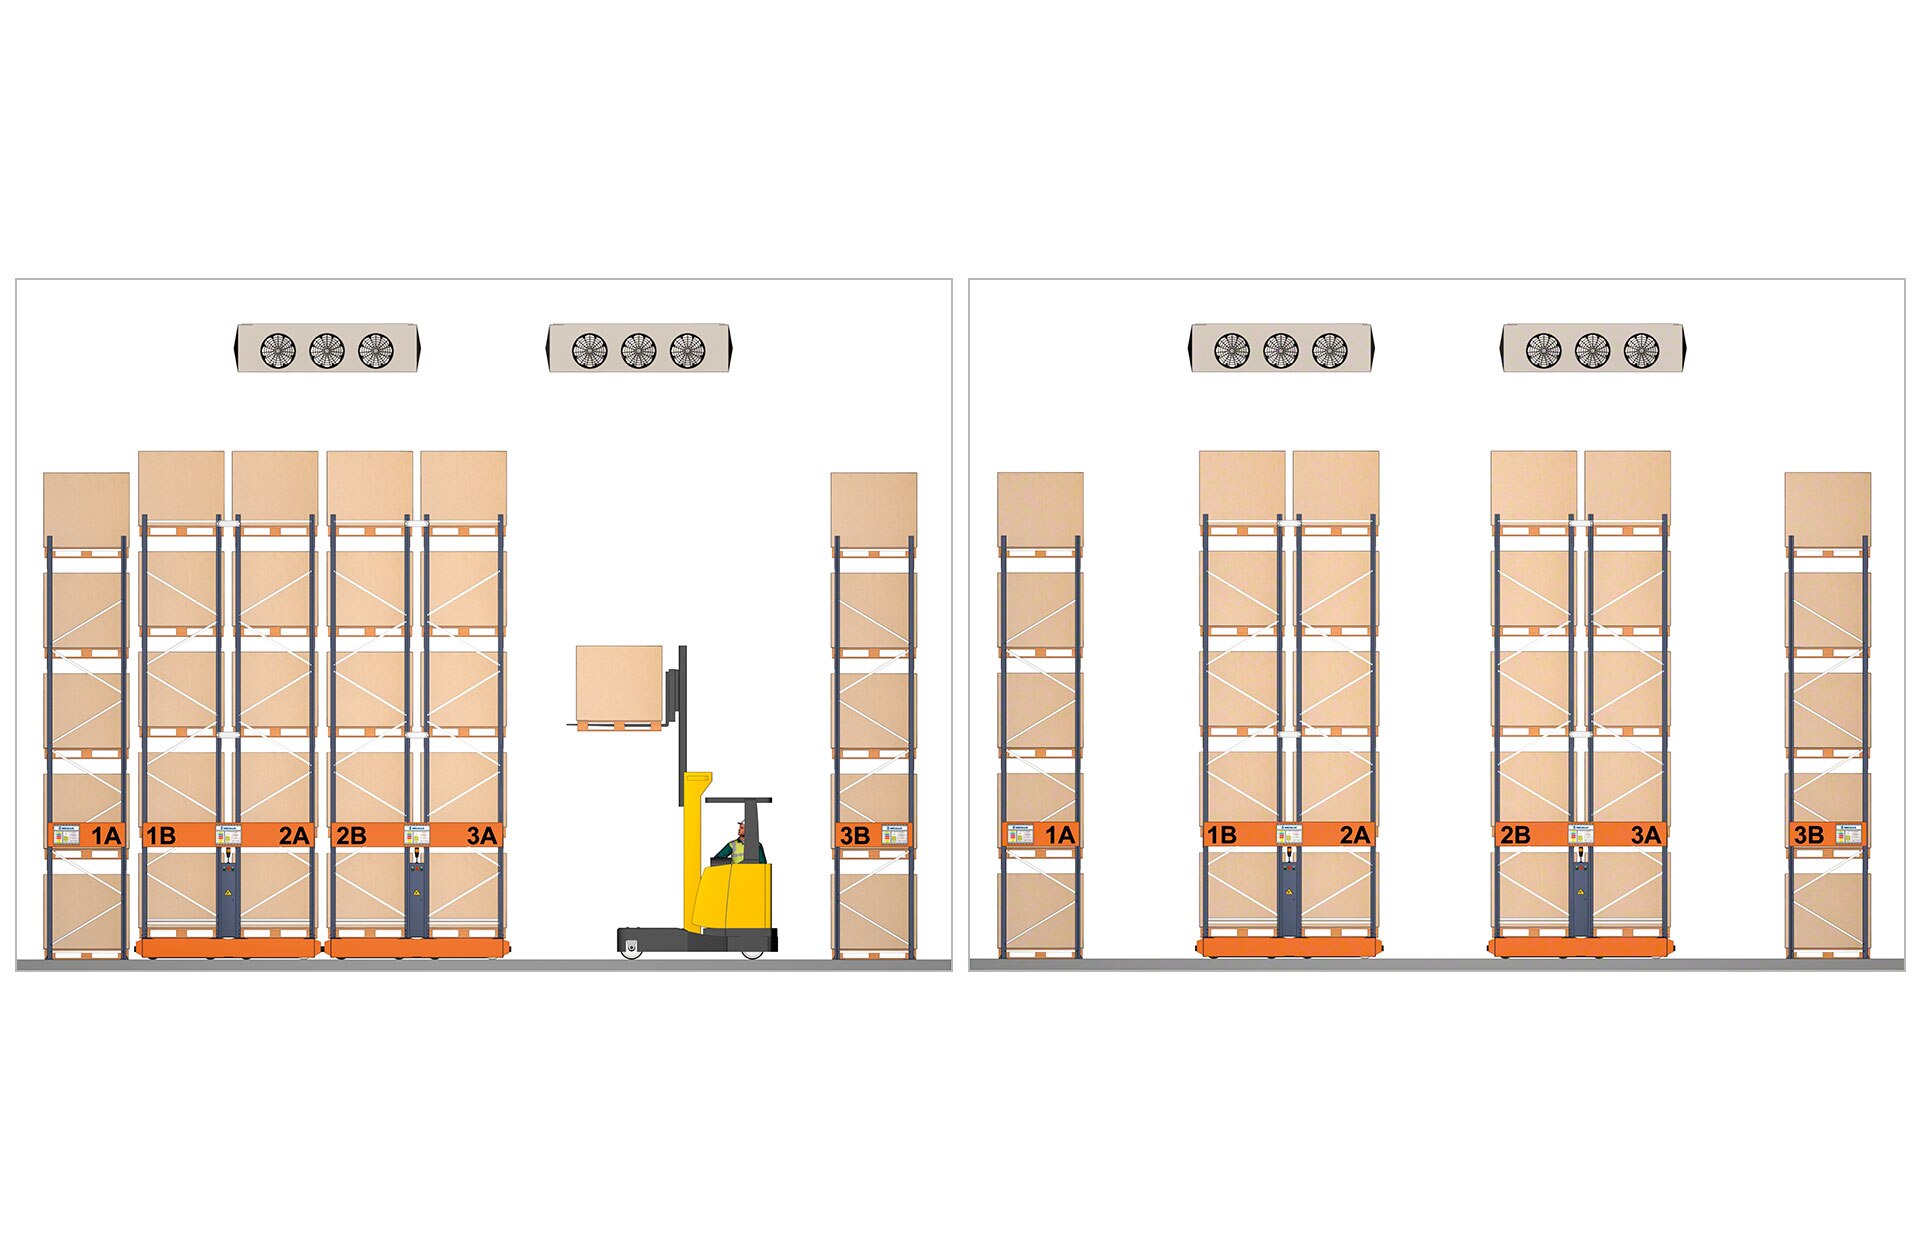 With Movirack racking, one or more access aisles can be opened depending on the task to be carried out